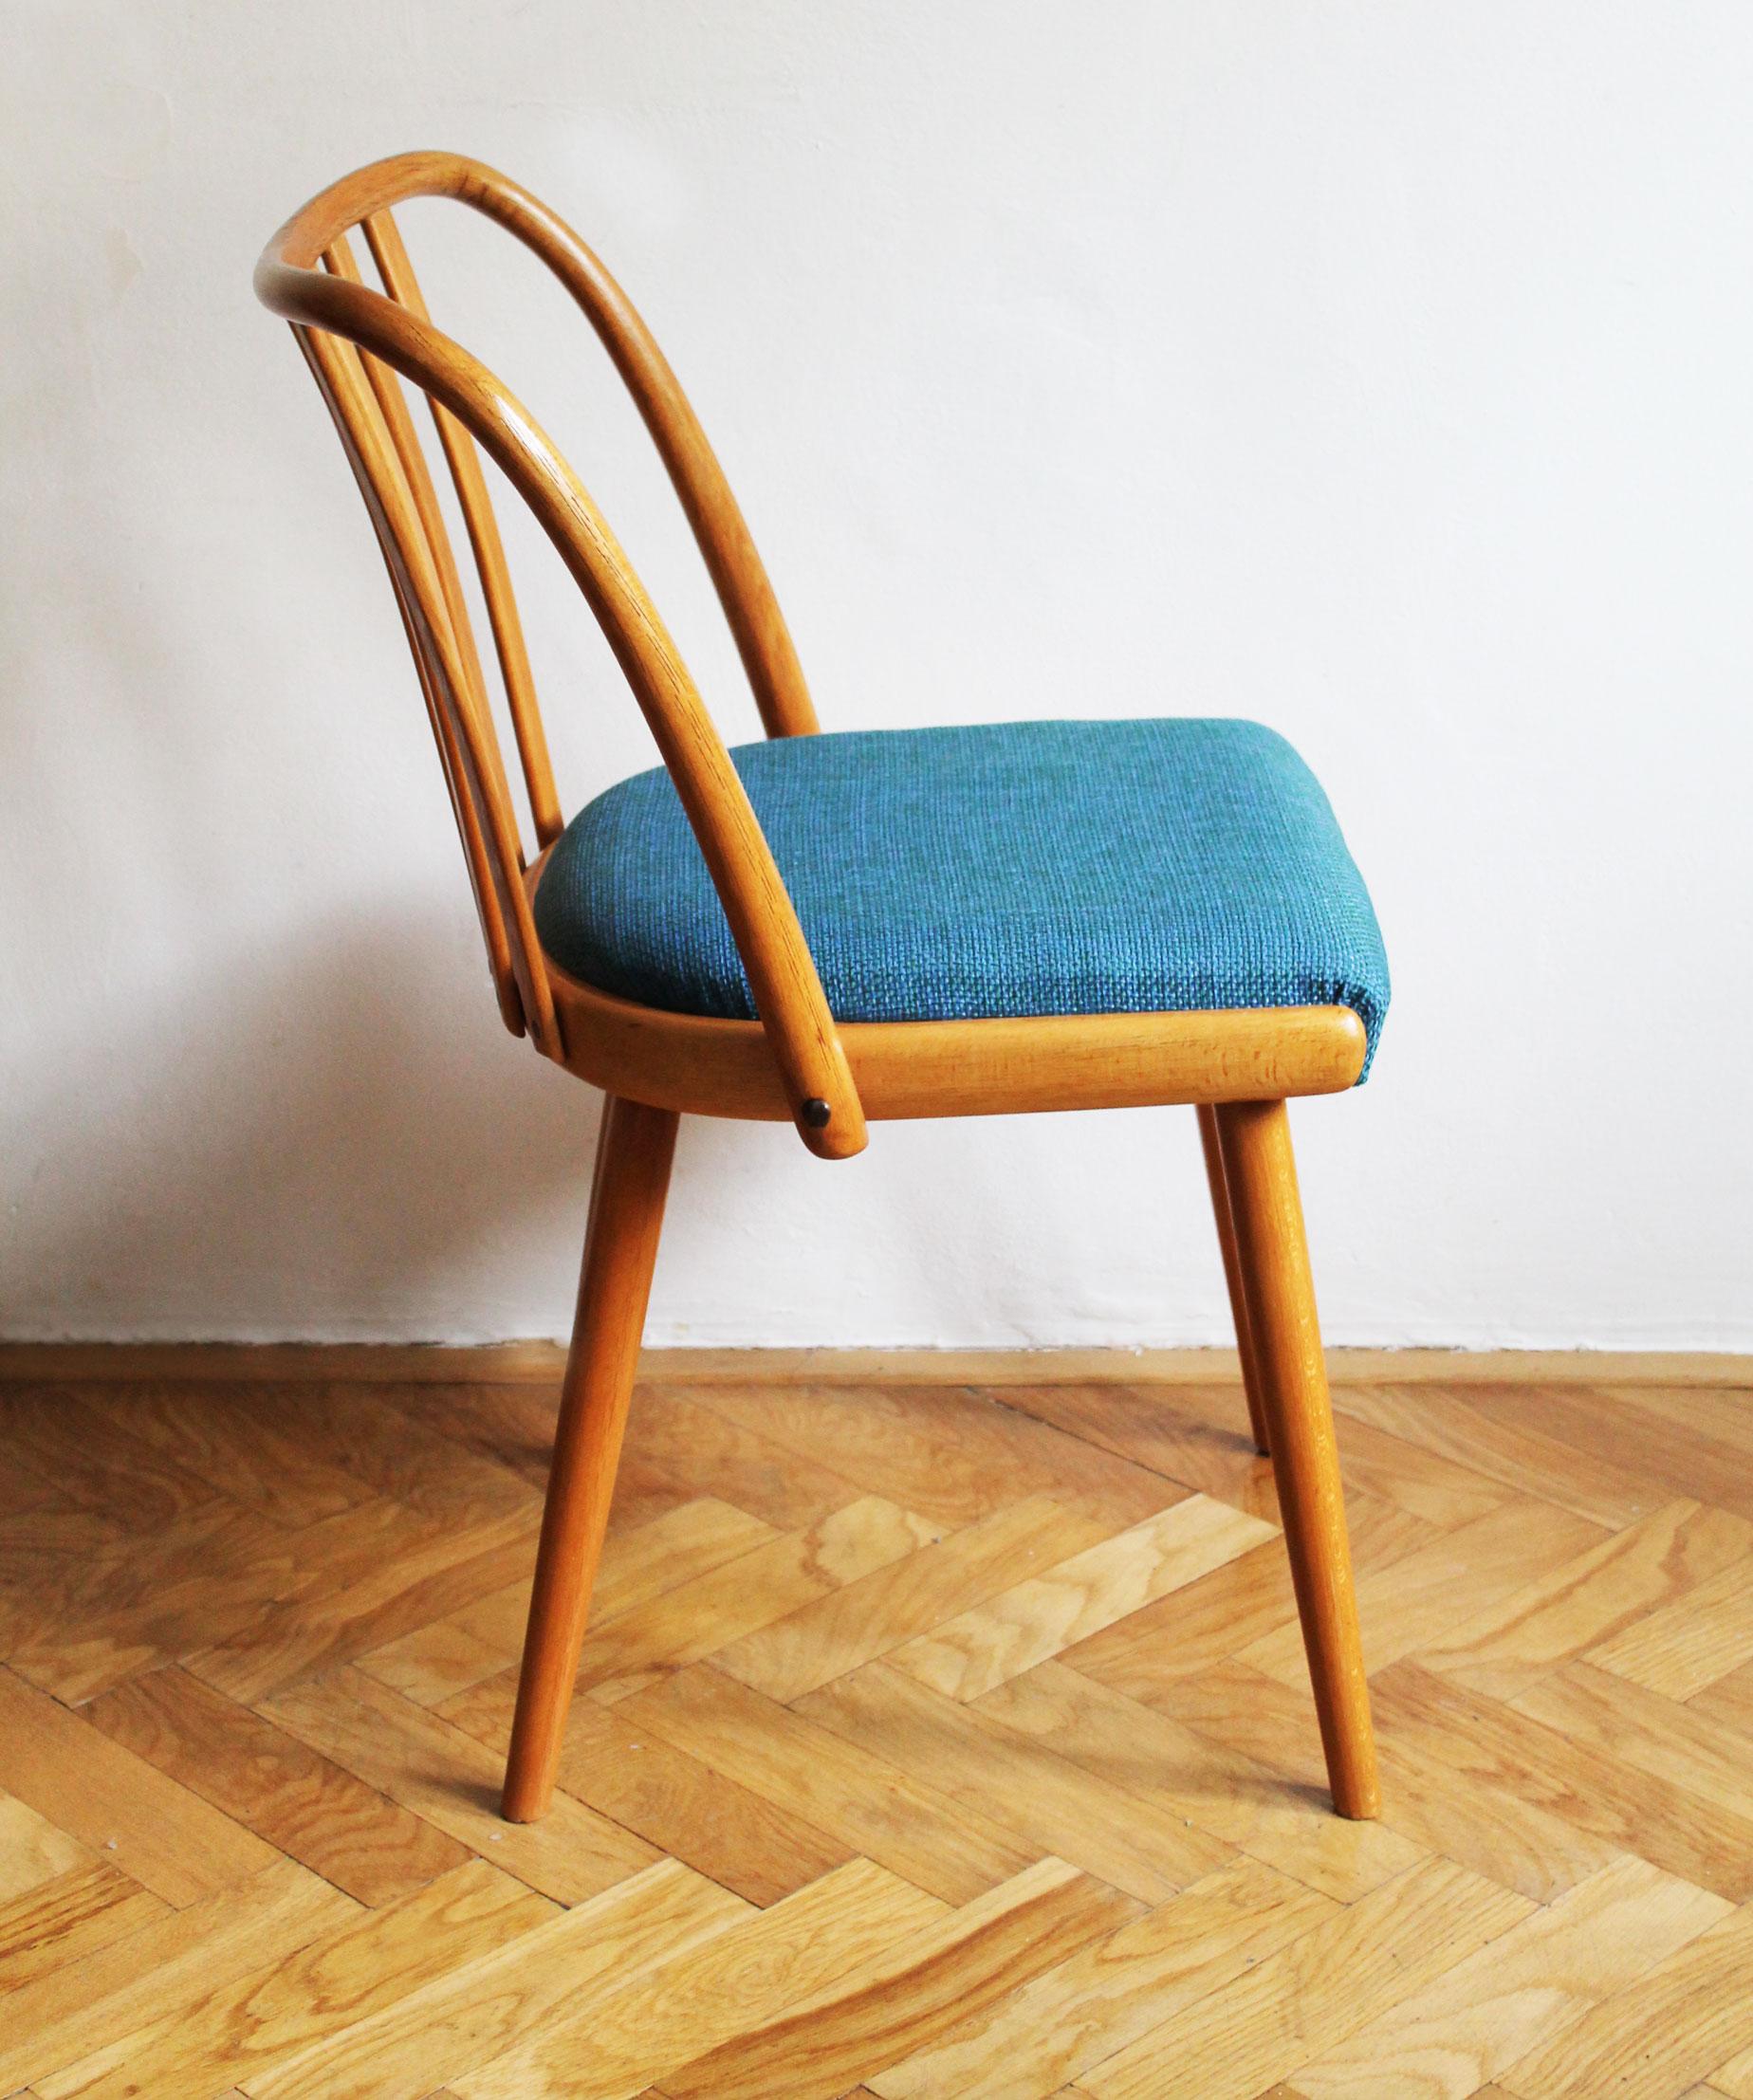 This is a dining chair model U -300 and it was produced by Interier Praha Company in former Czechoslovakia.

This simple slender beech frame dining chair was designed in 1960’s by the renown Czech furniture designer Antonin Suman. The softly curved